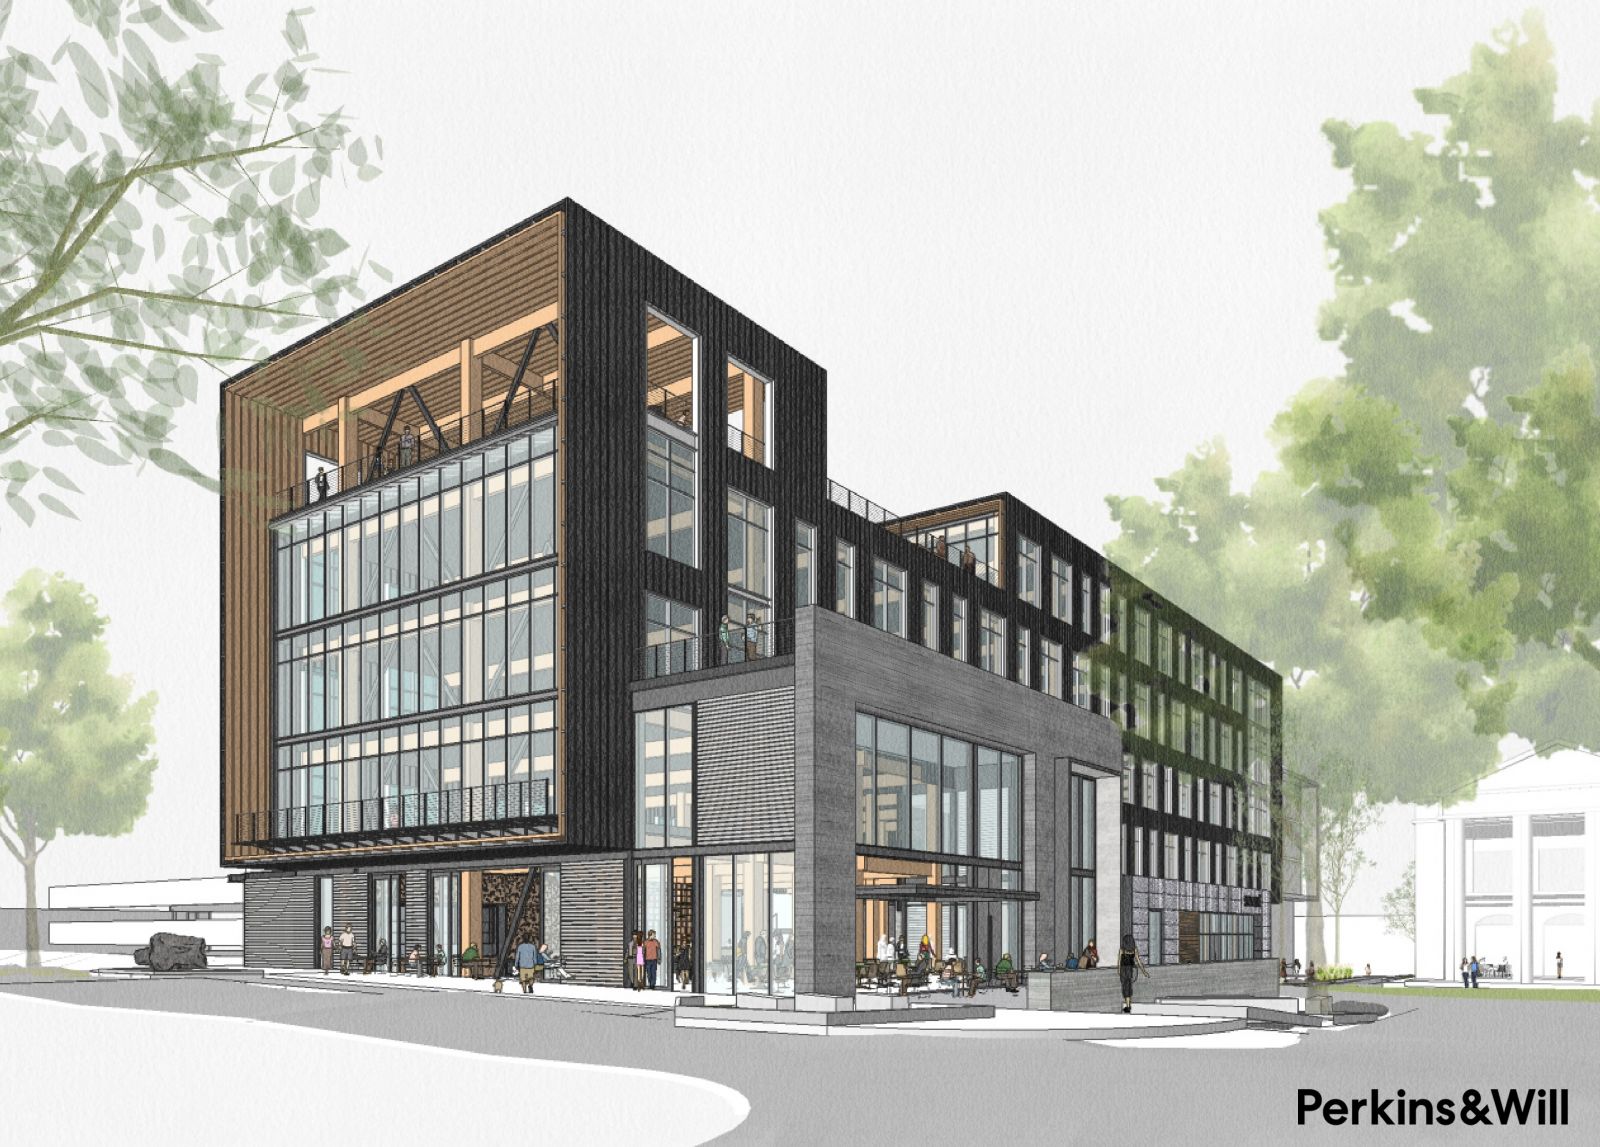 A 75,000-square-foot office building made of mass timber is coming to the BullStreet District. The WestLawn building is expected to be completed in 2022. (Rendering/Provided)